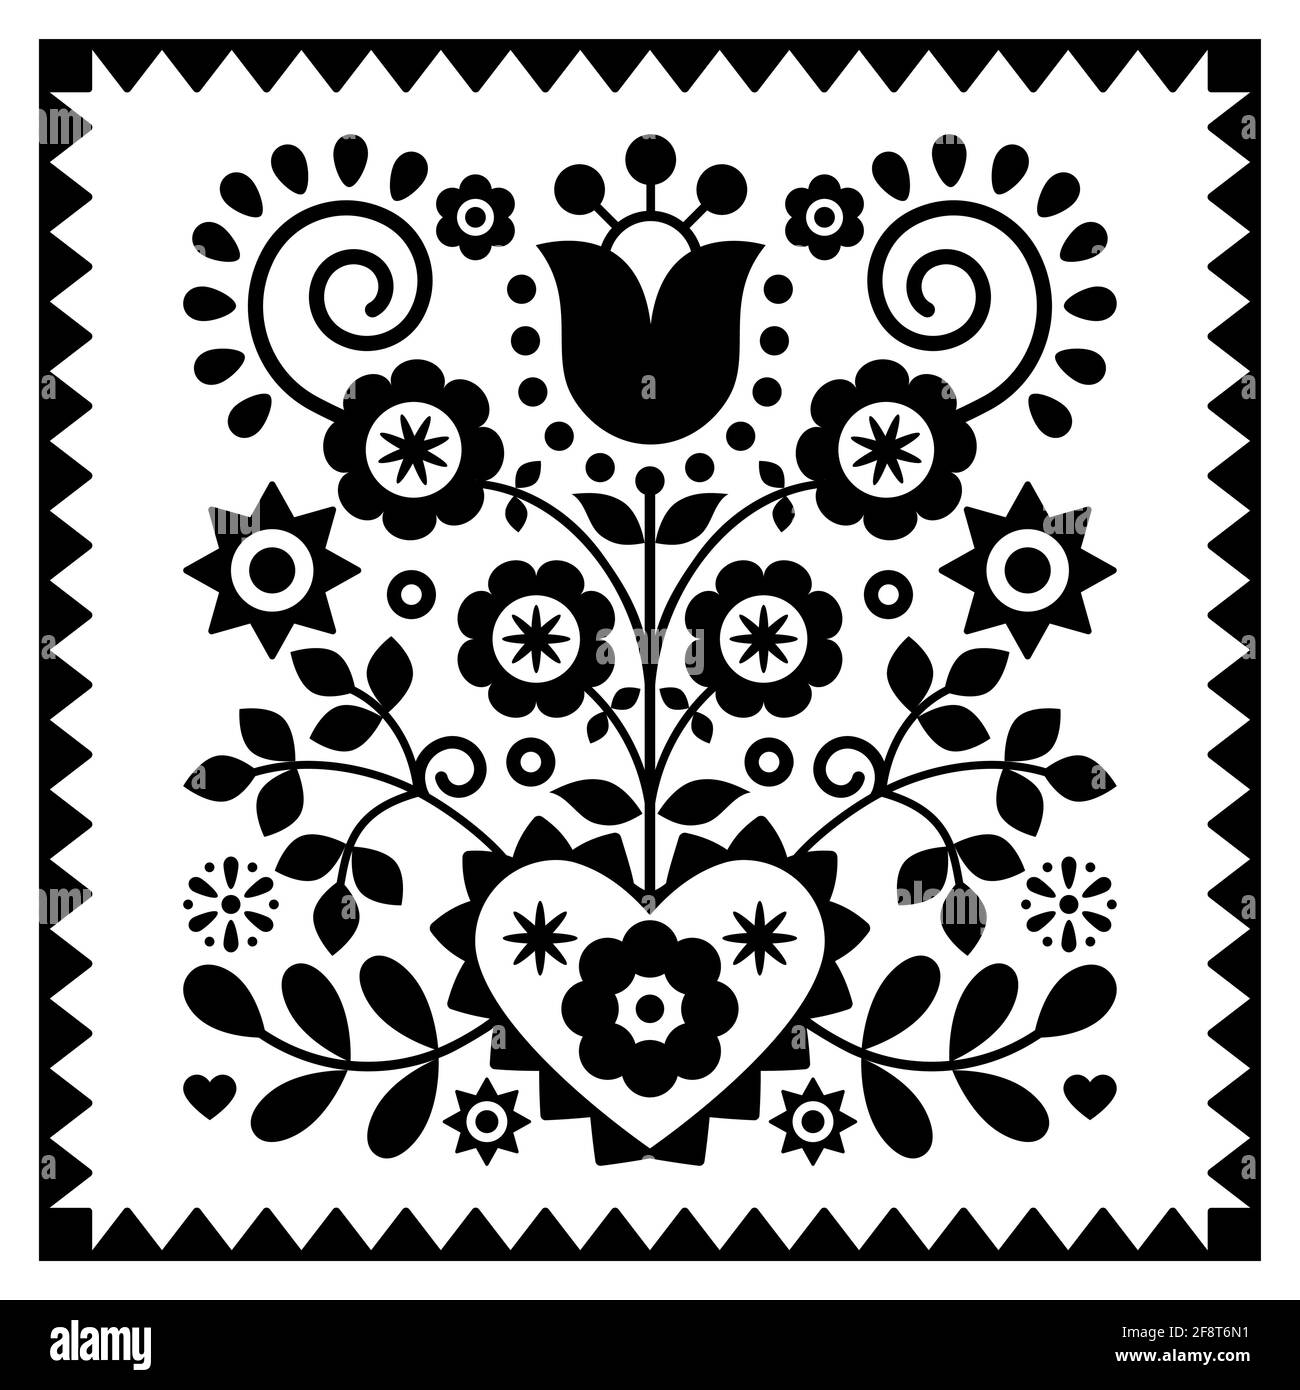 Floral monochrome folk art vector design in square frame from Nowy Sacz in Poland inspired by traditional highlanders embroidery Lachy Sadeckie Stock Vector